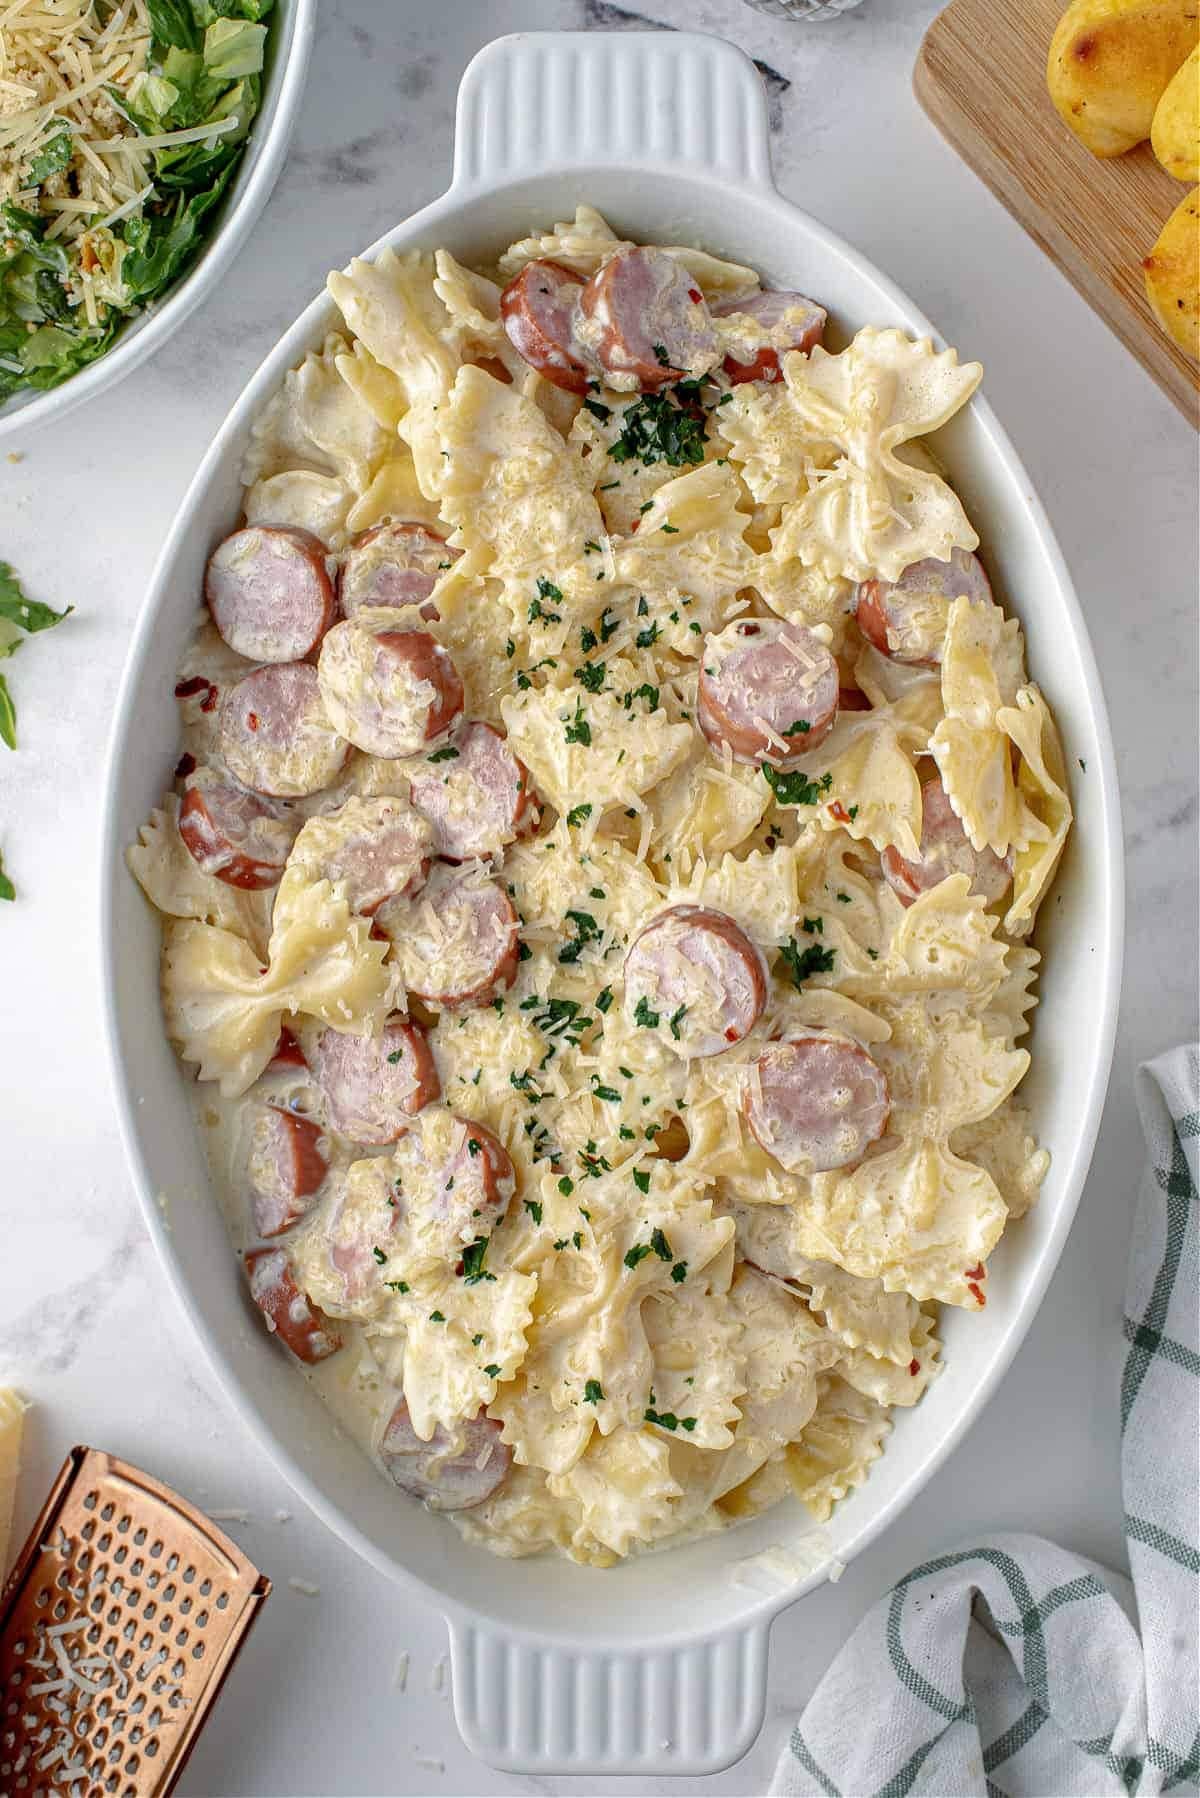 Mouth-watering pasta casserole featuring sausage and gooey cheese